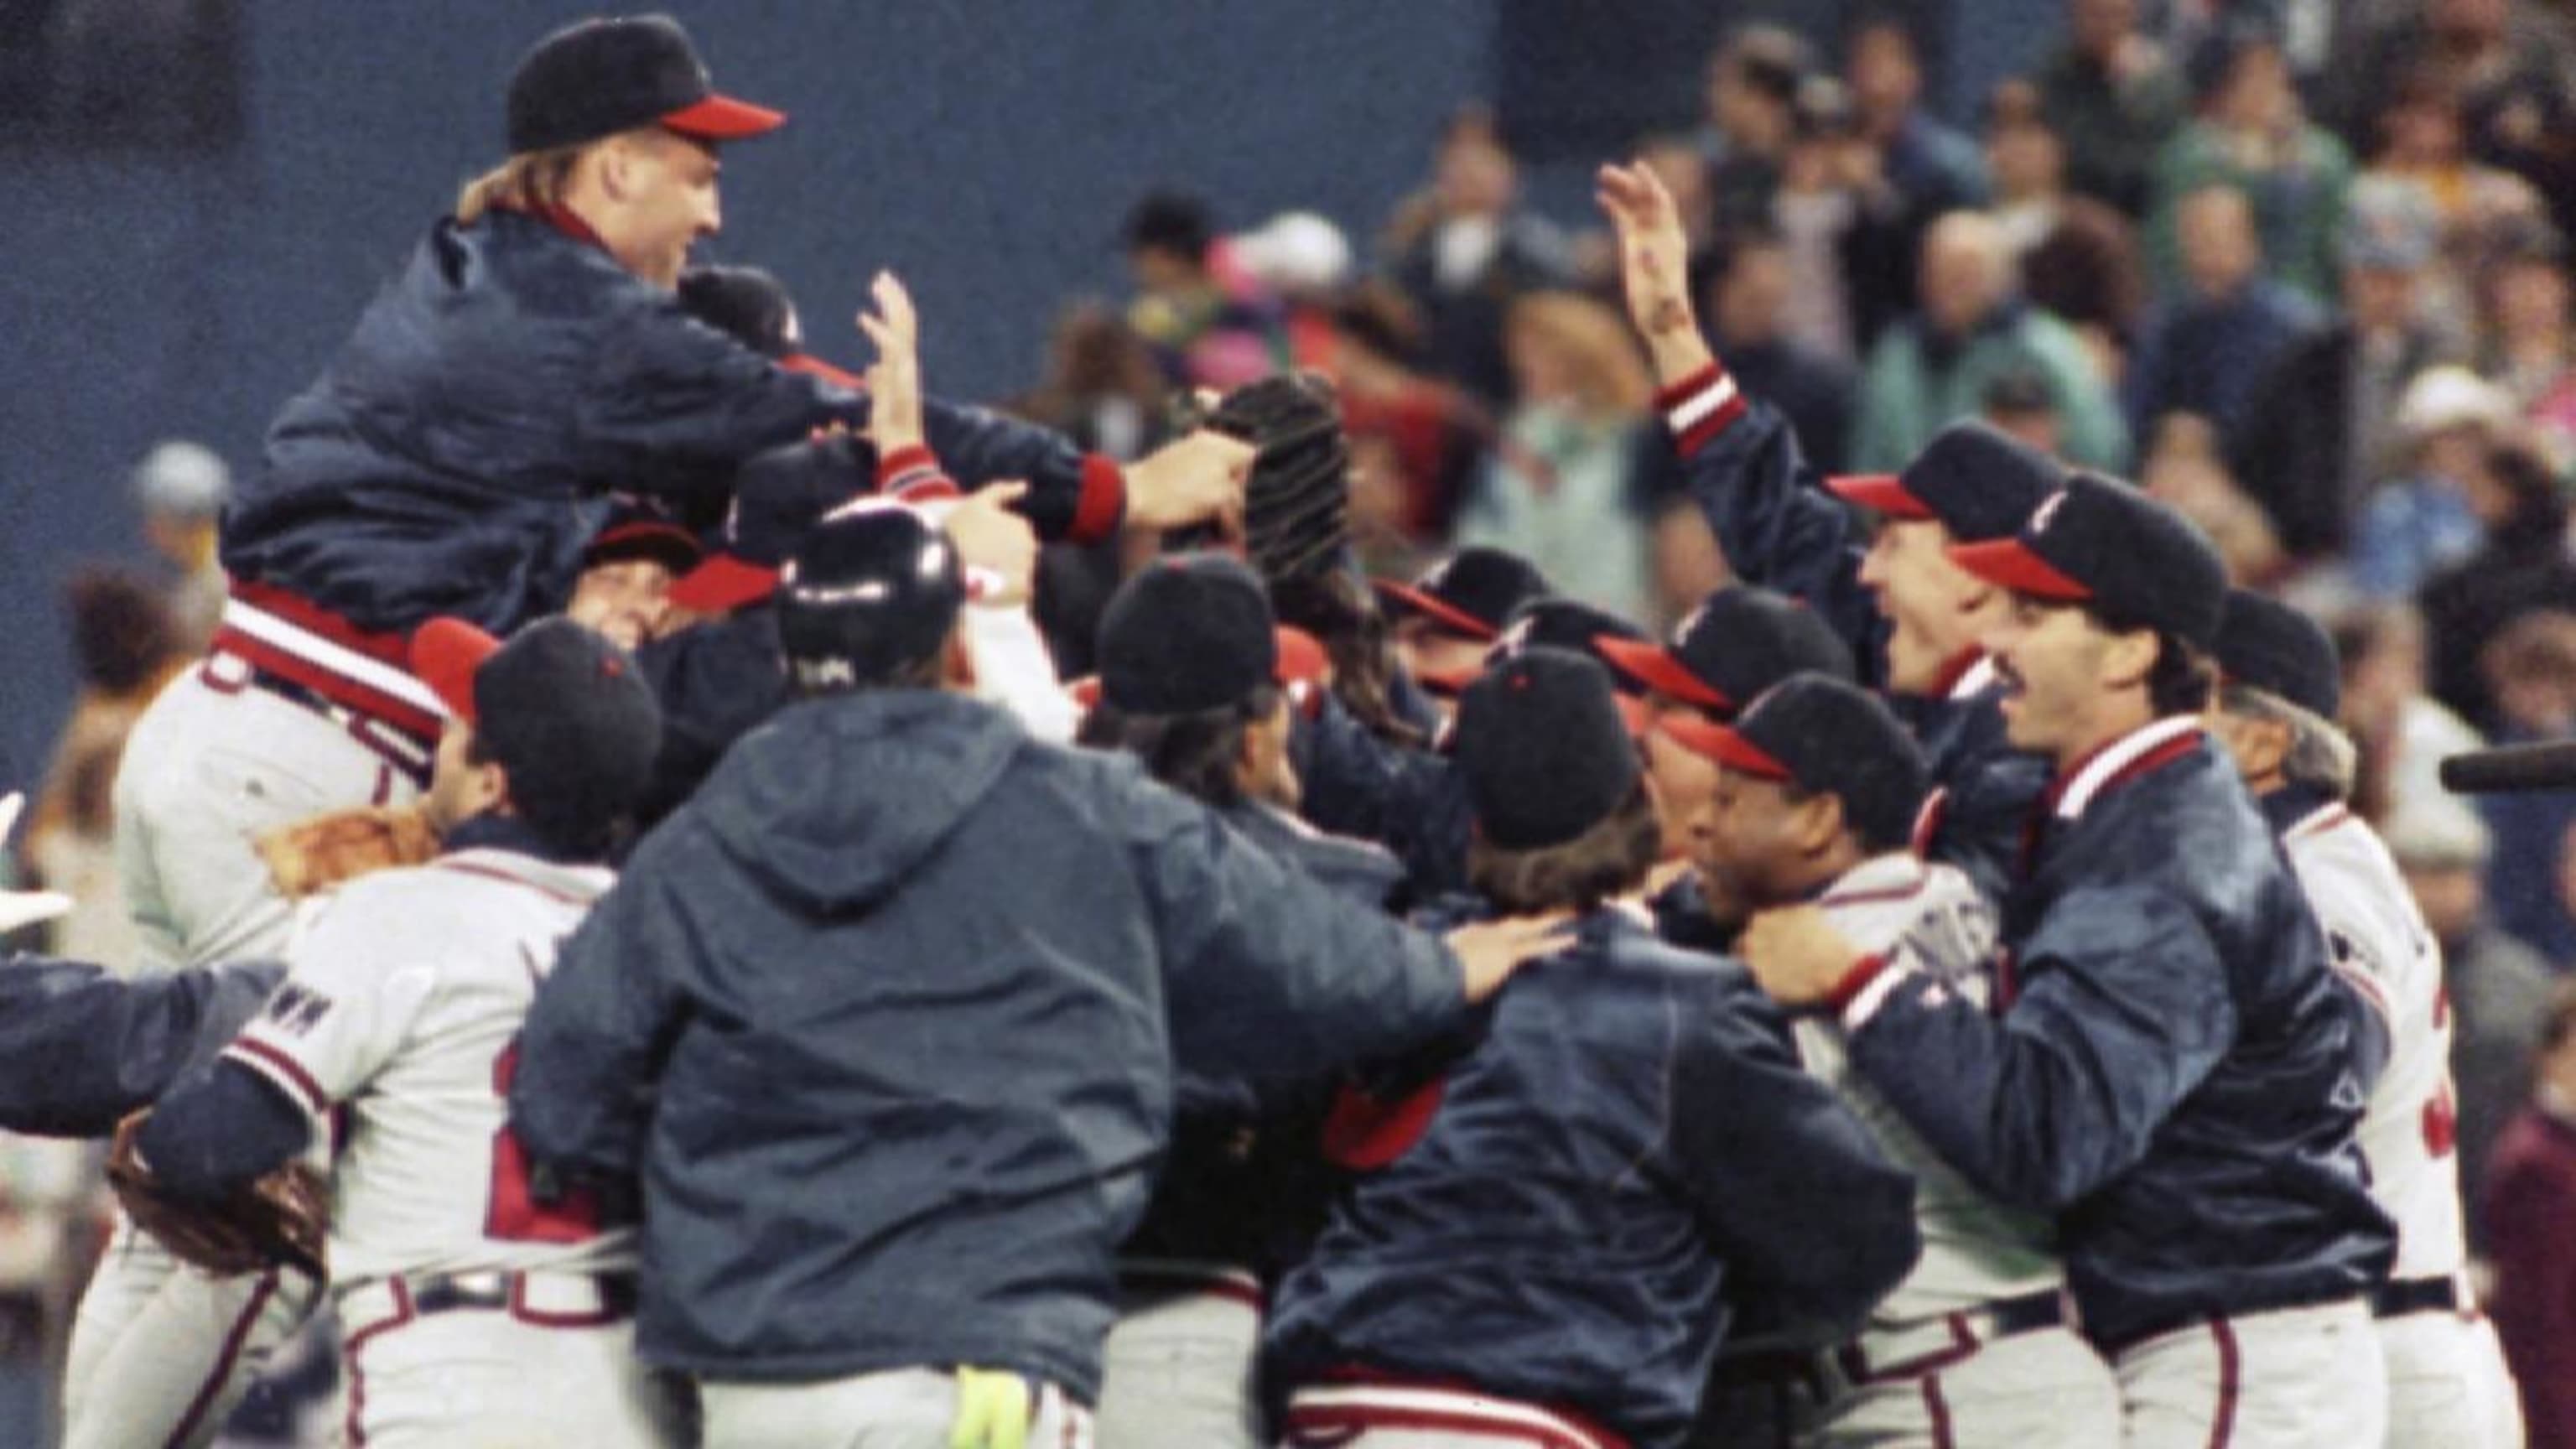 MLB Network - On this day in 1987: The Braves acquired RHP